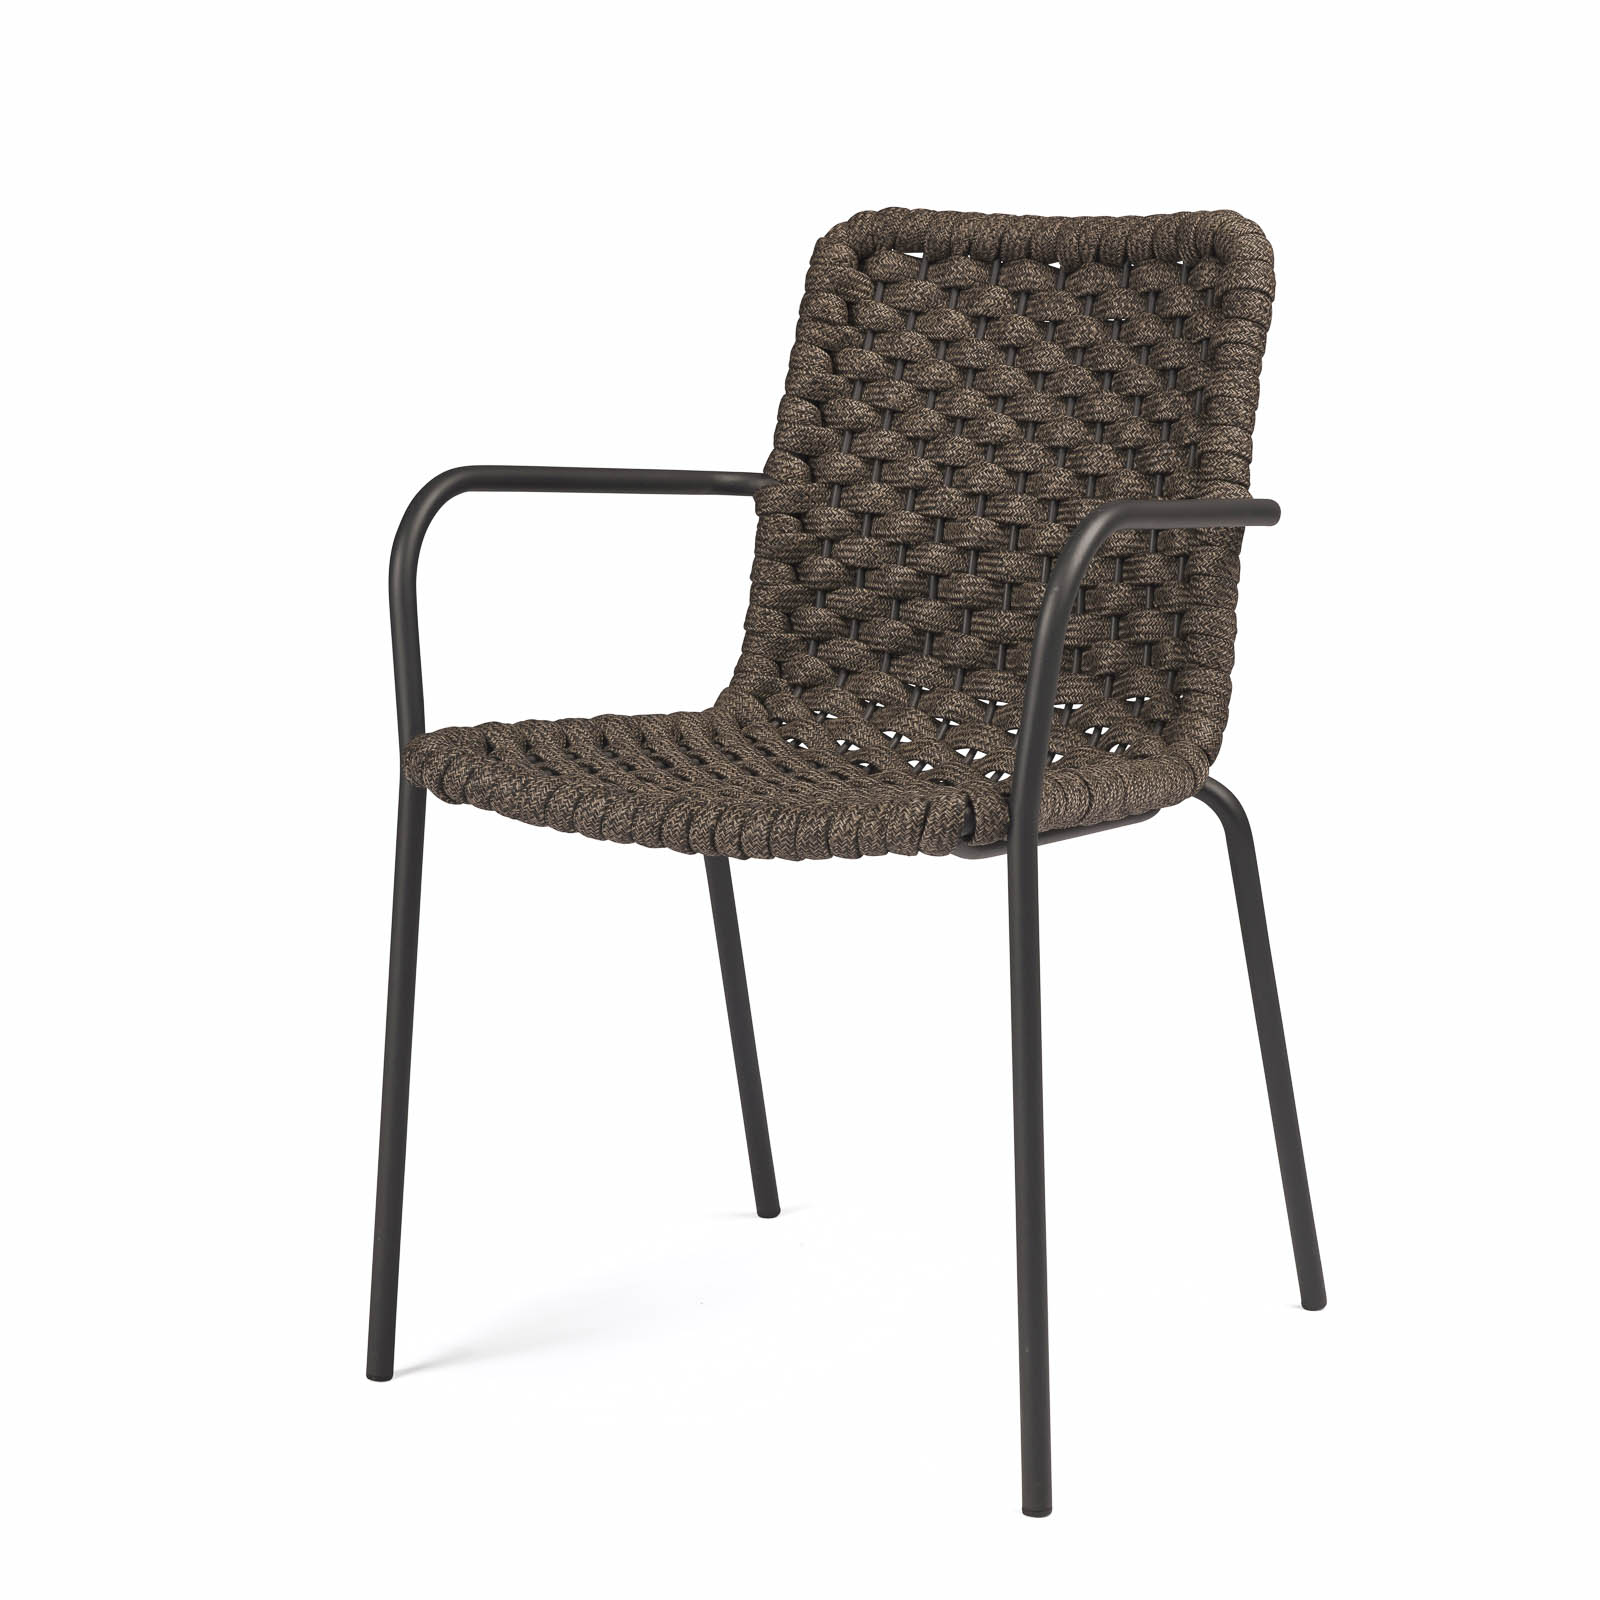 Rope Outdoor Dining Chair| Restaurant Patio Seating | Teak Warehouse